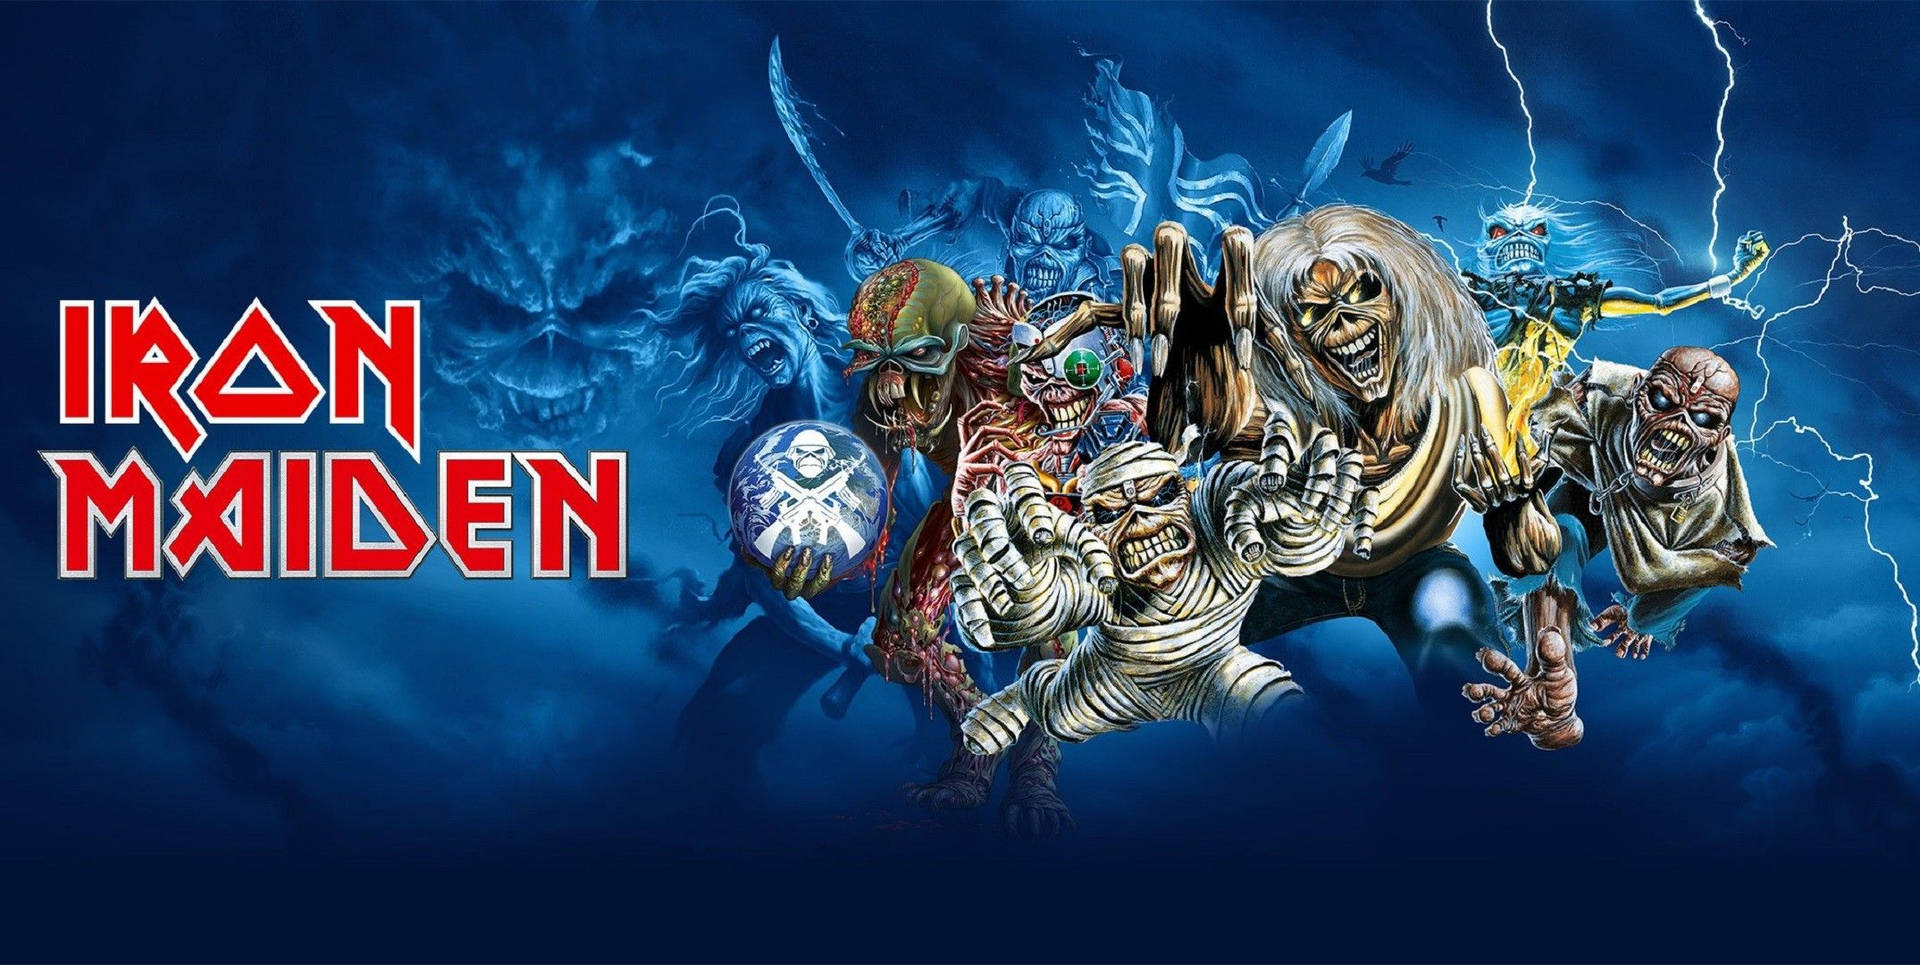 "Iron Maiden's iconic Eddie mascot prowling through a mystical landscape." Wallpaper